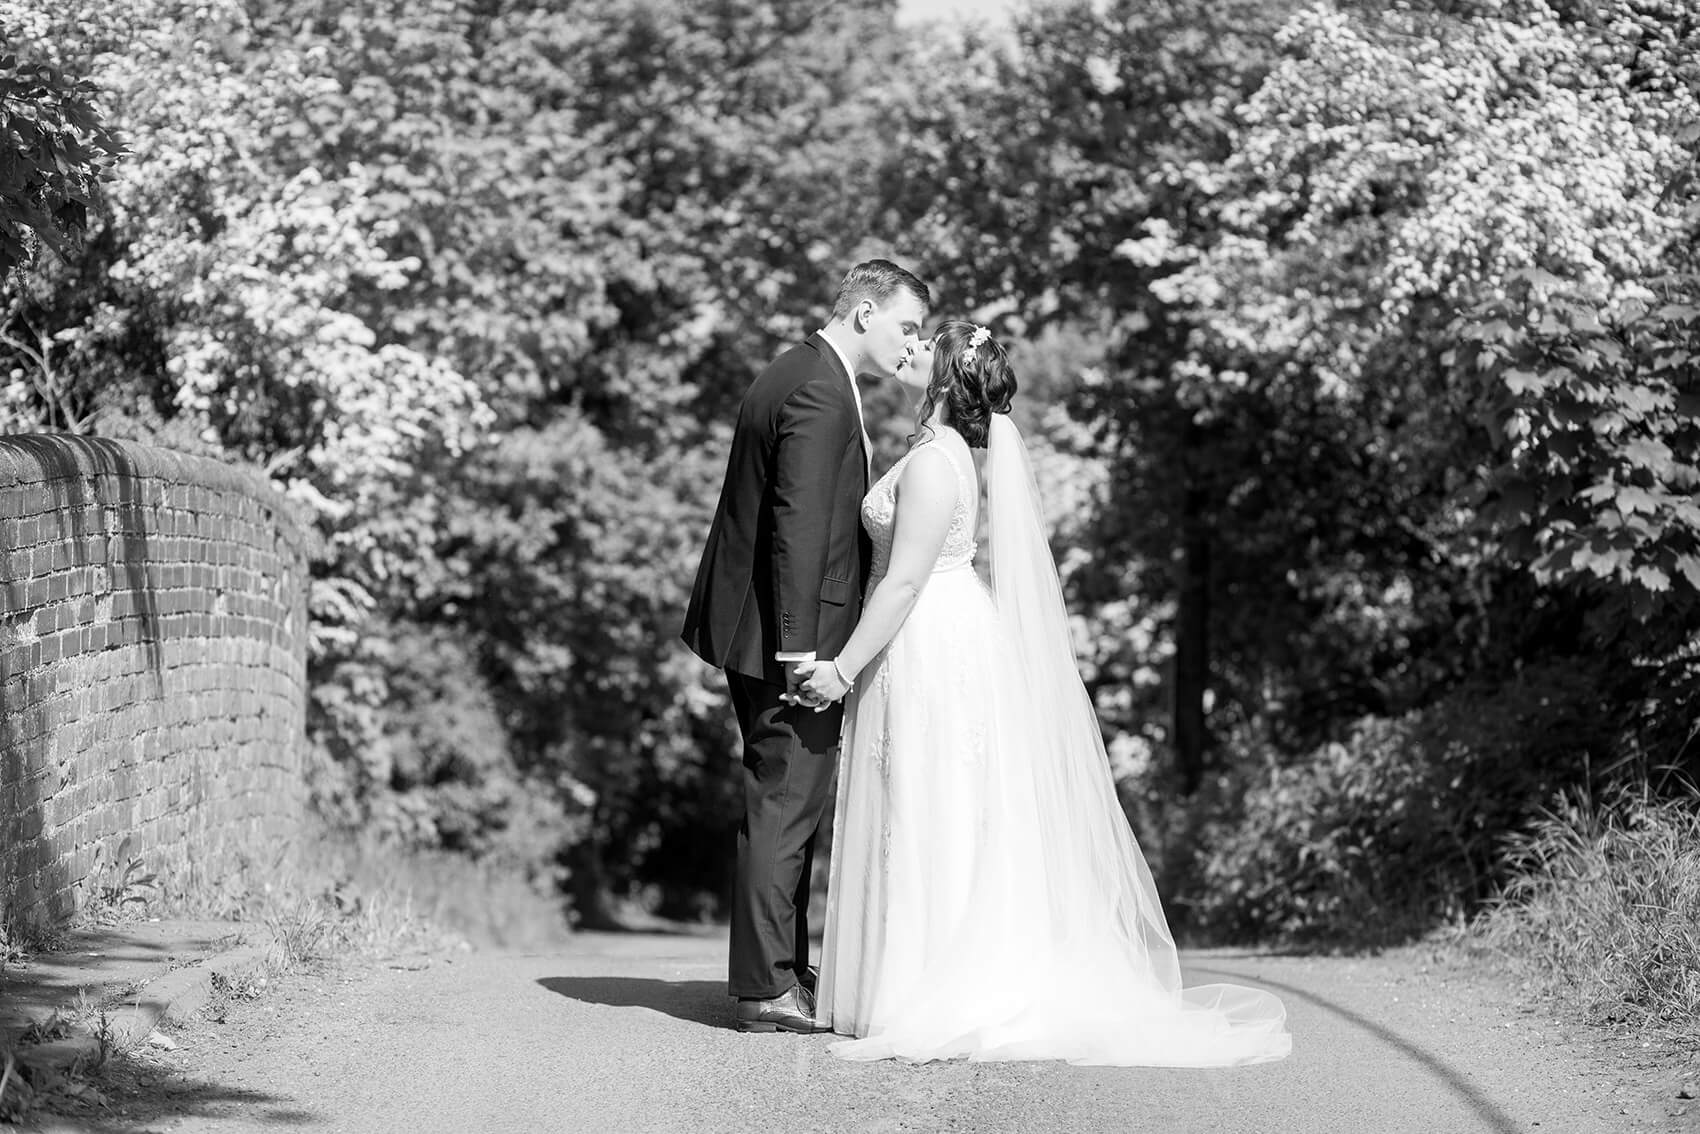 Black and white image of a bride and groom kissing